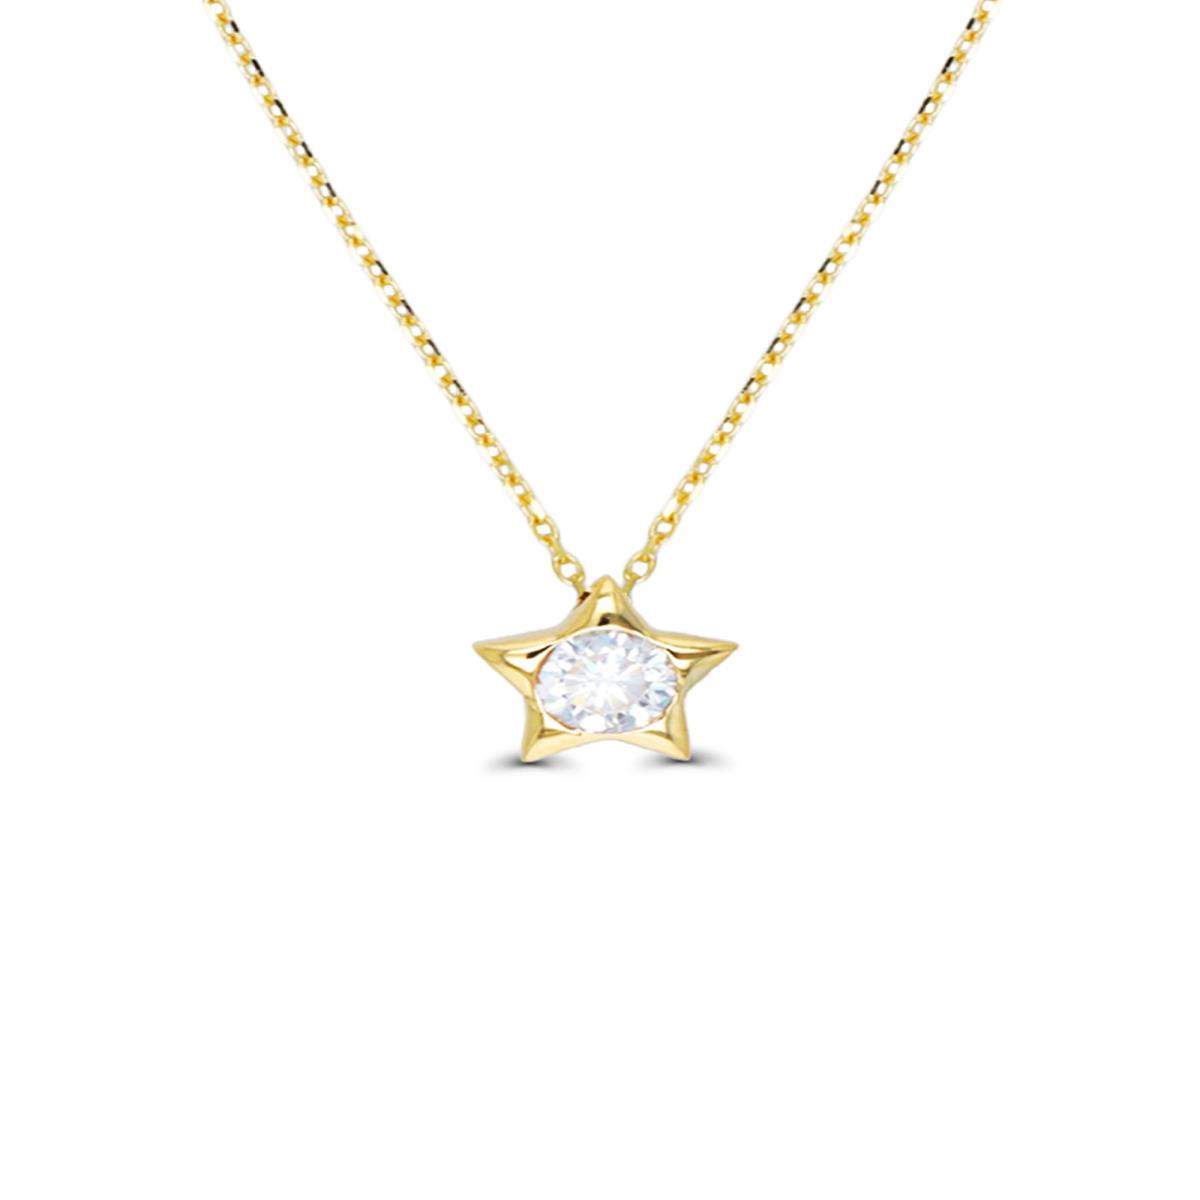 10K Yellow Gold 4mm Rd Star 16"+2" Necklace